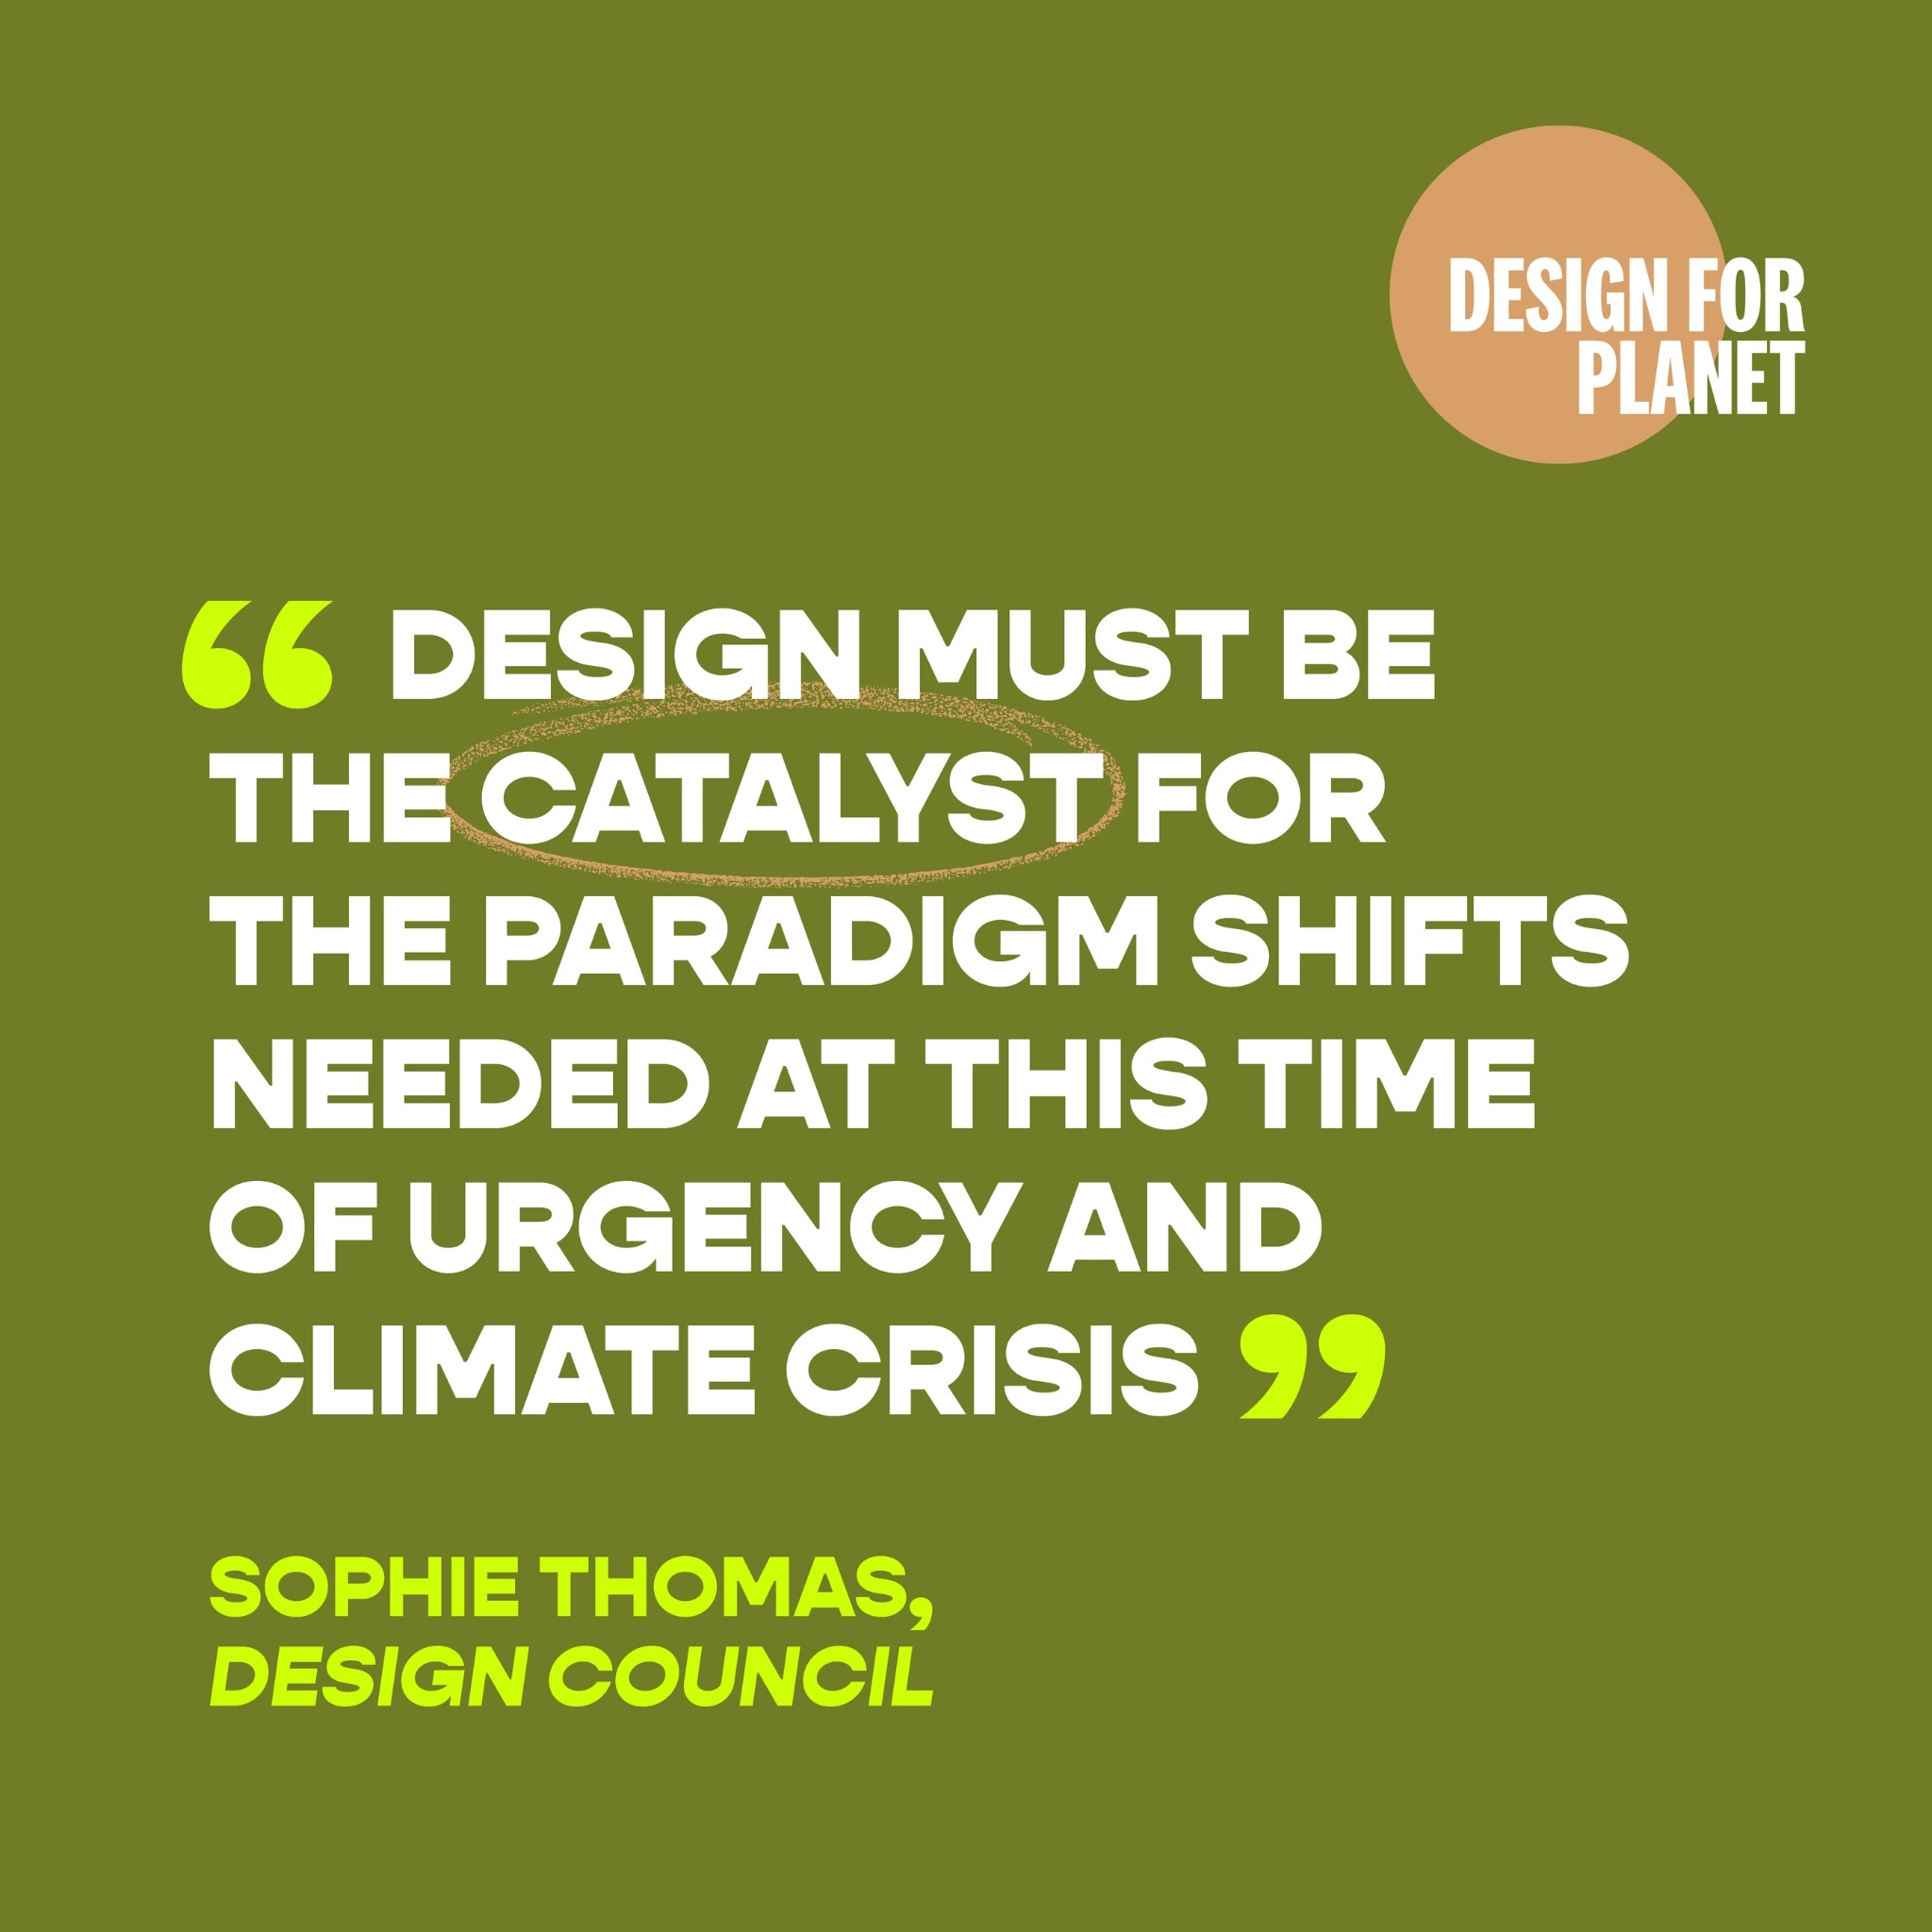 sustainable design, Designing for the Planet with Minnie Moll